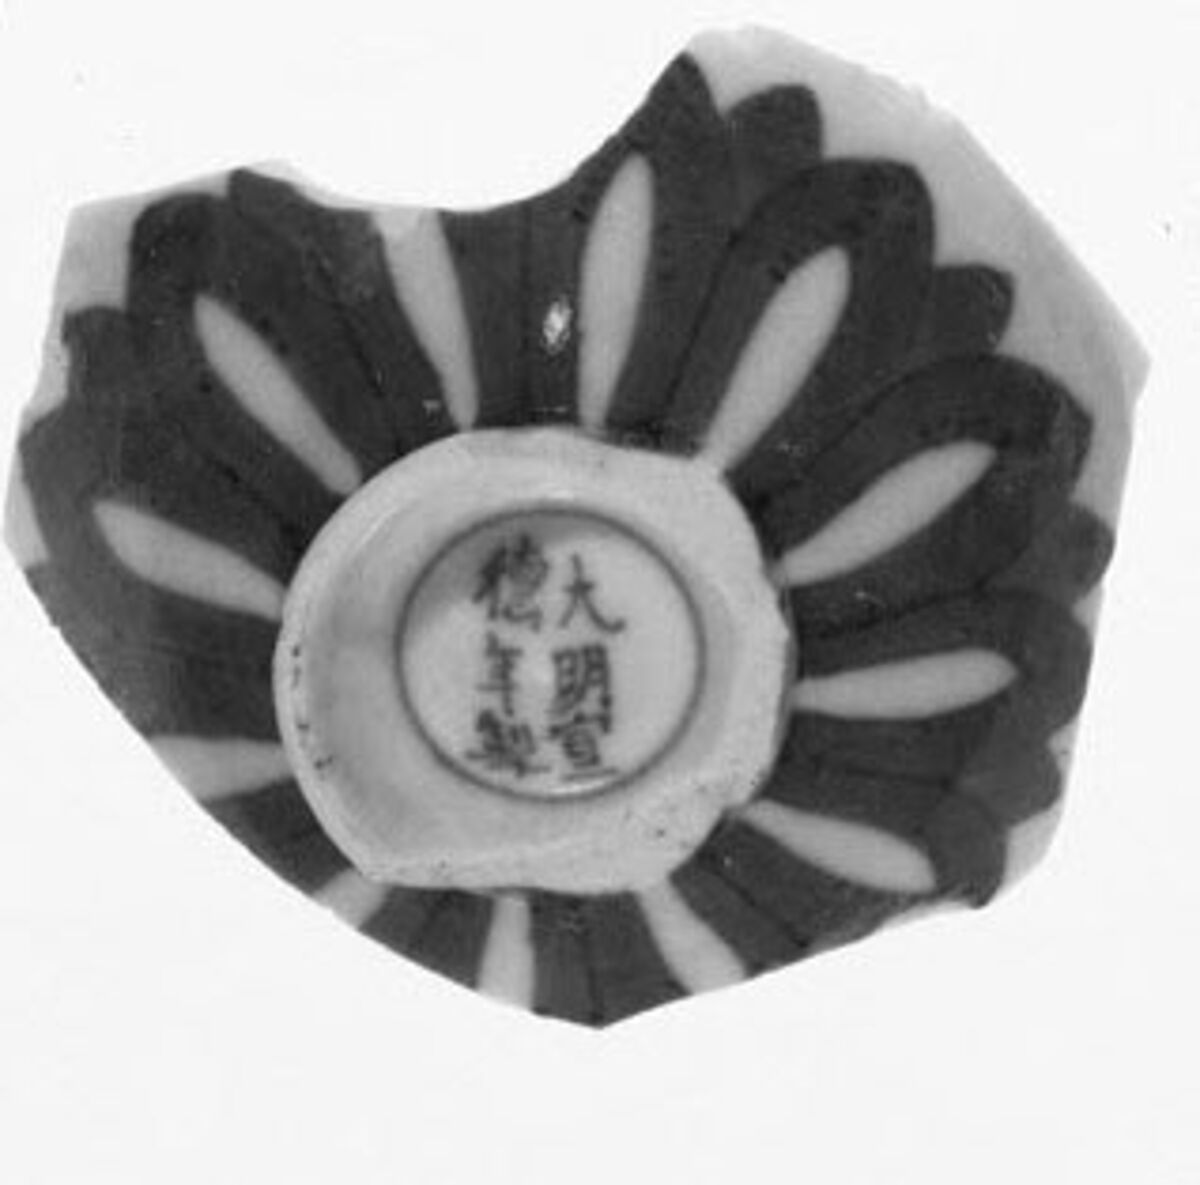 Fragment of a Bowl (Study Collection), Blue-and-white porcelain, China 